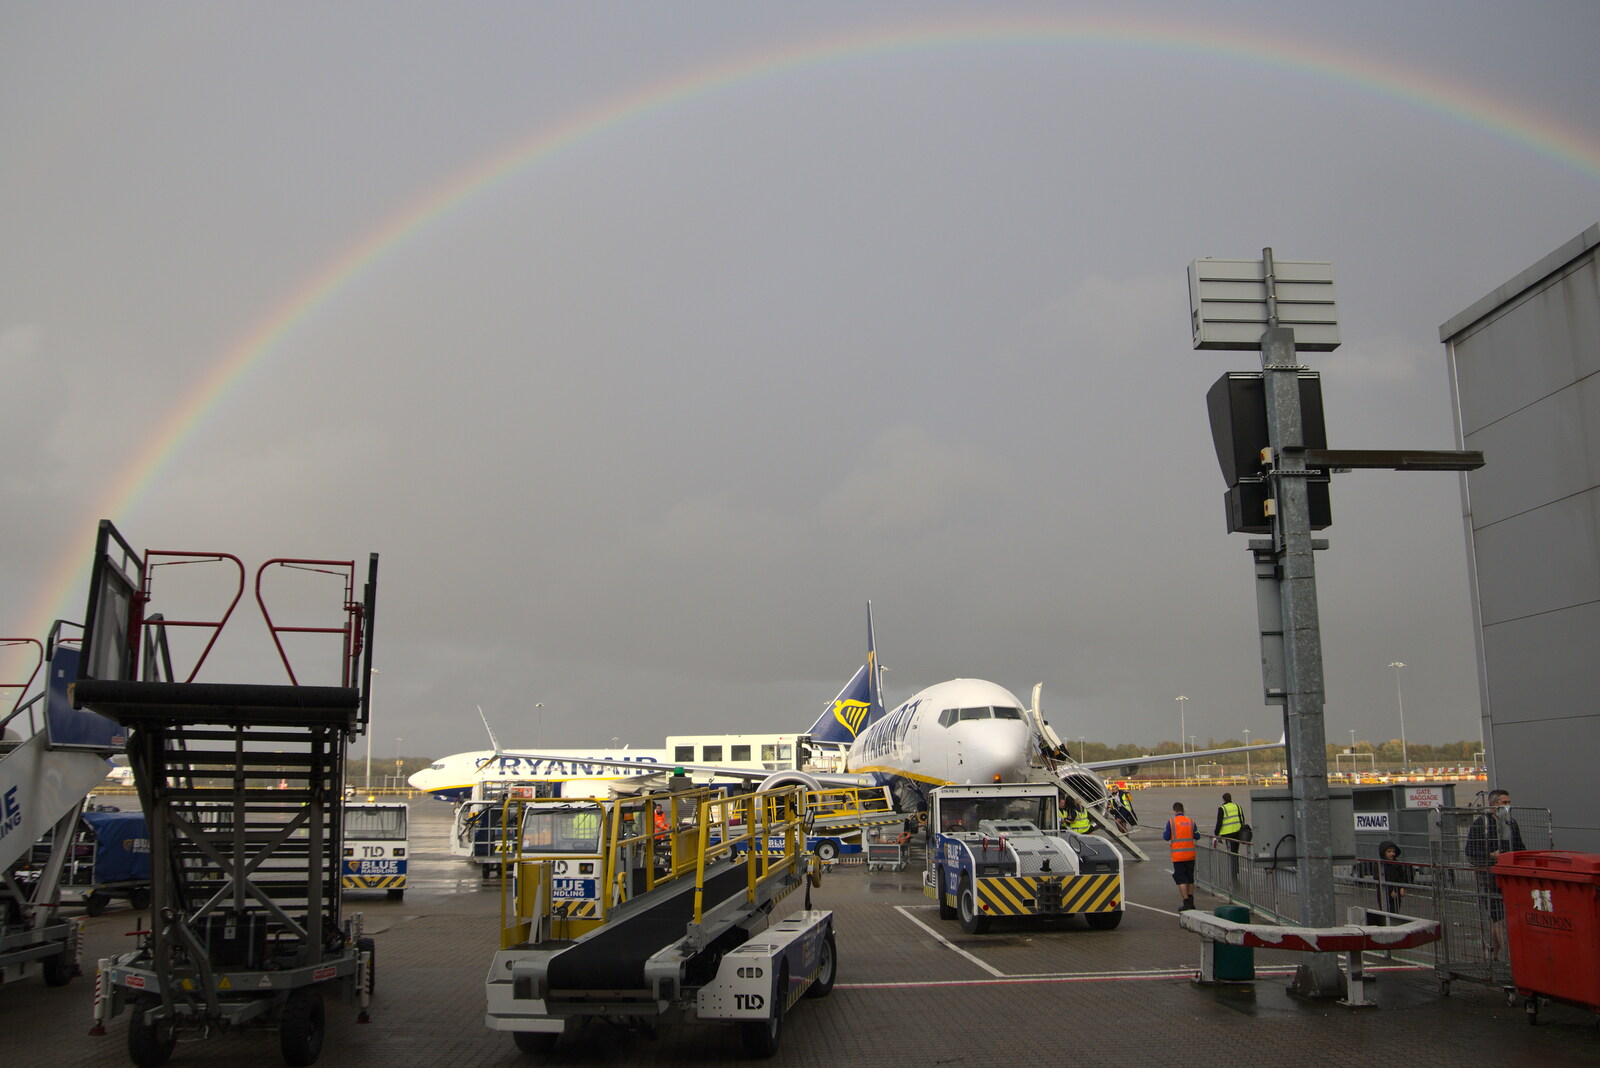 An optimistic rainbow over the gloom of Ryanair from The Volcanoes of Lanzarote, Canary Islands, Spain - 27th October 2021